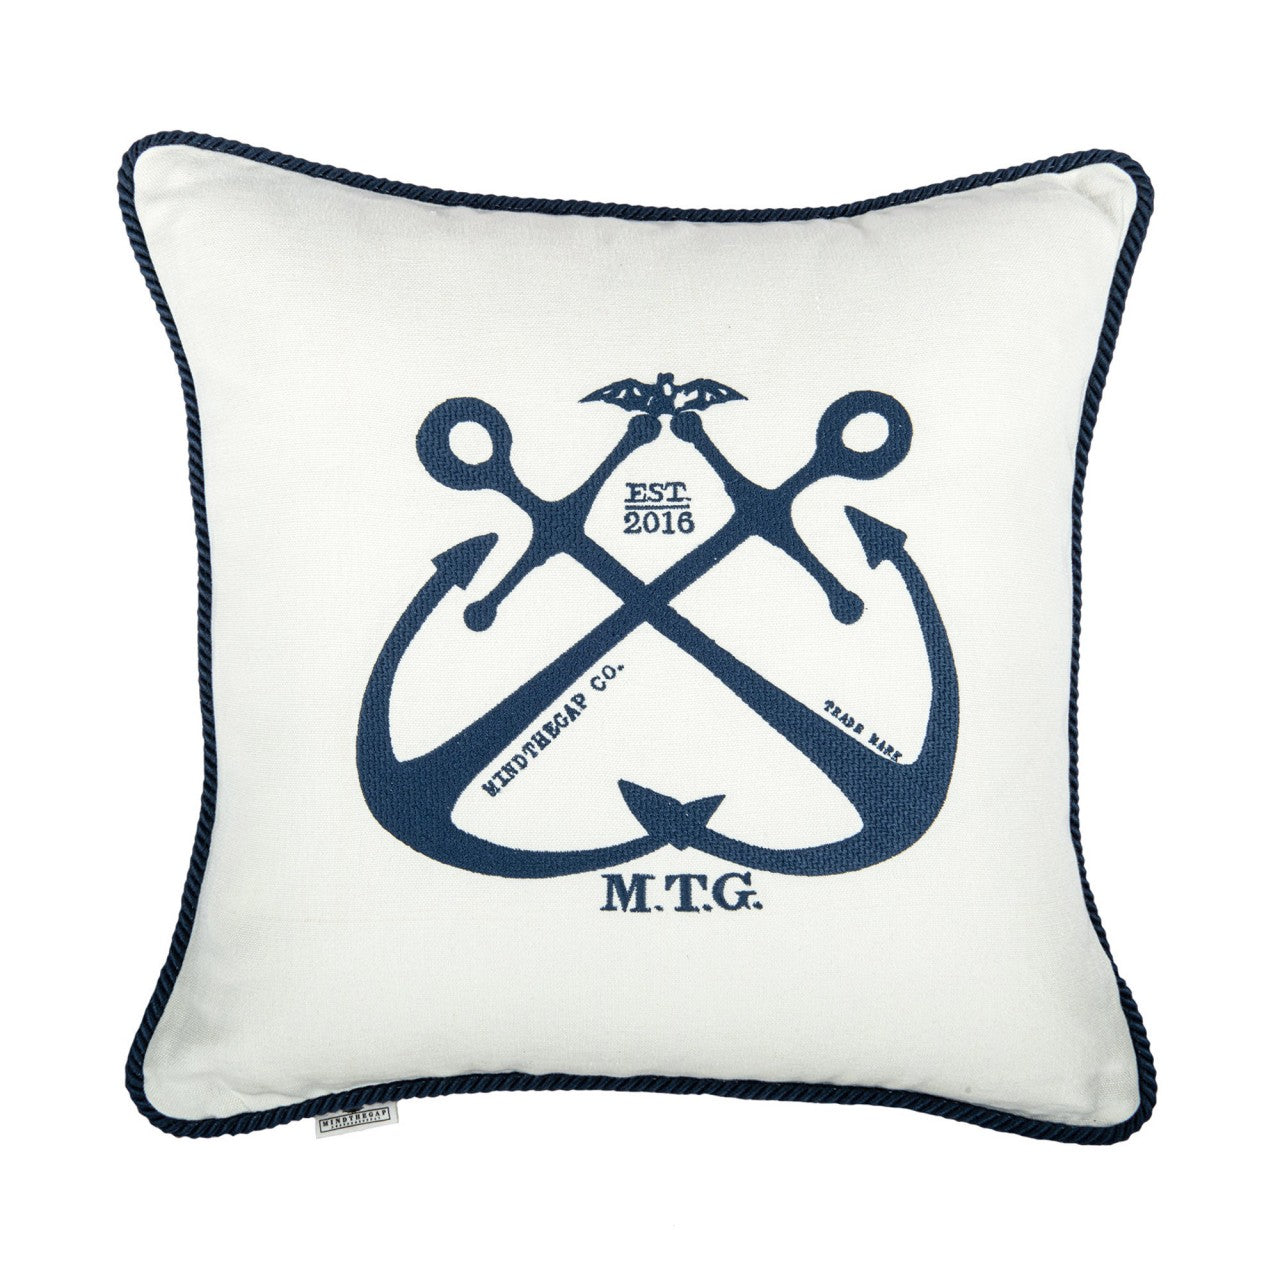 VINTAGE ANCHORS Linen Embroidered Cushion - White